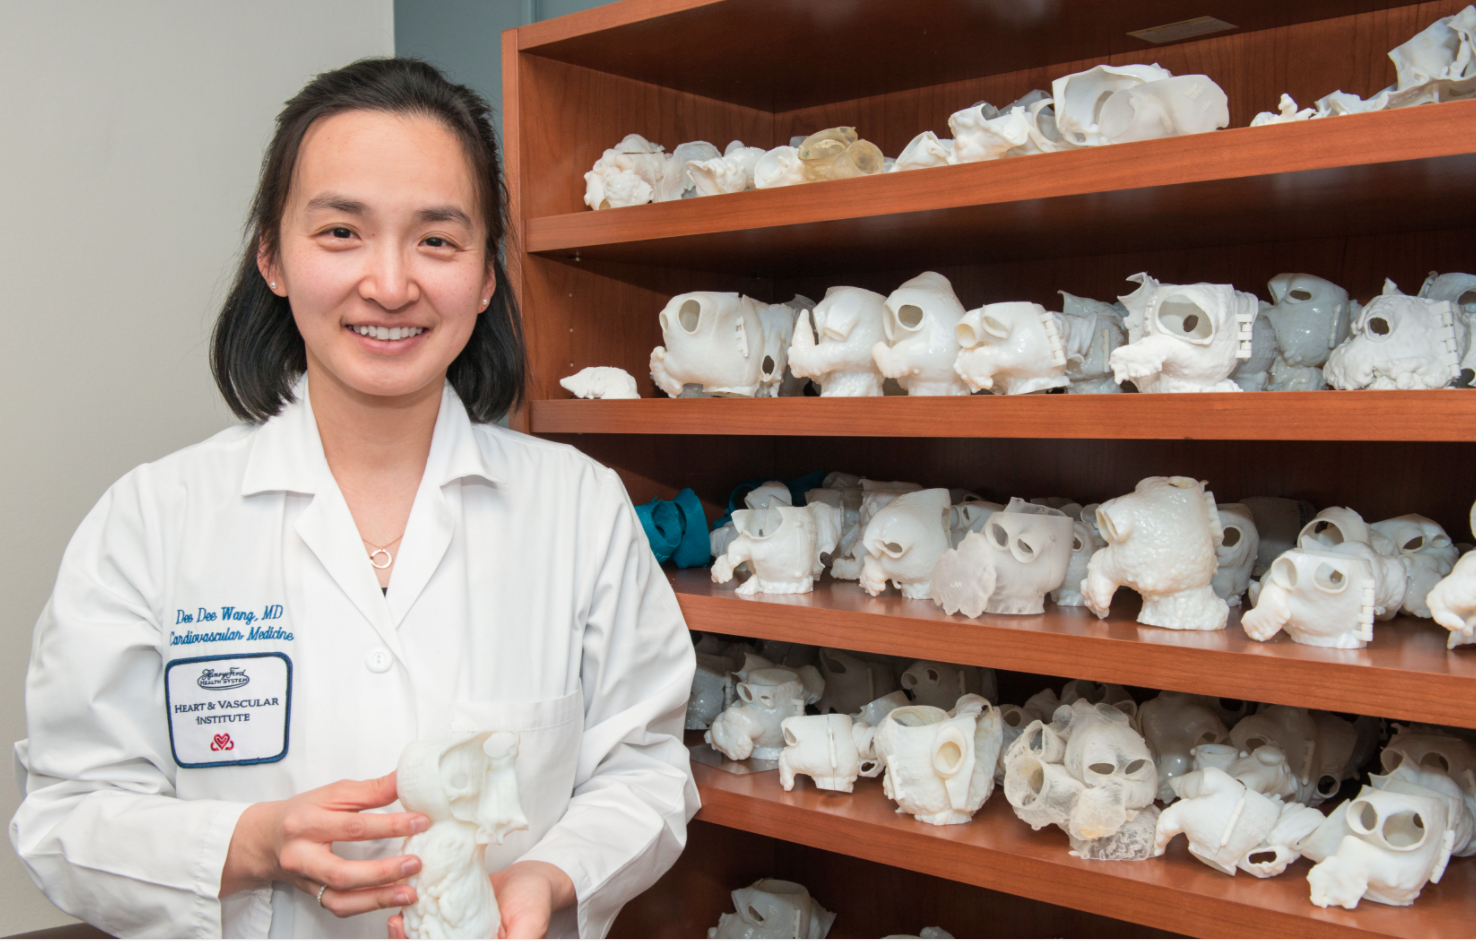 Dee Dee Wang, M.D., runs Henry Ford Hospital's 3-D printing lab that supports its complex structural heart program.